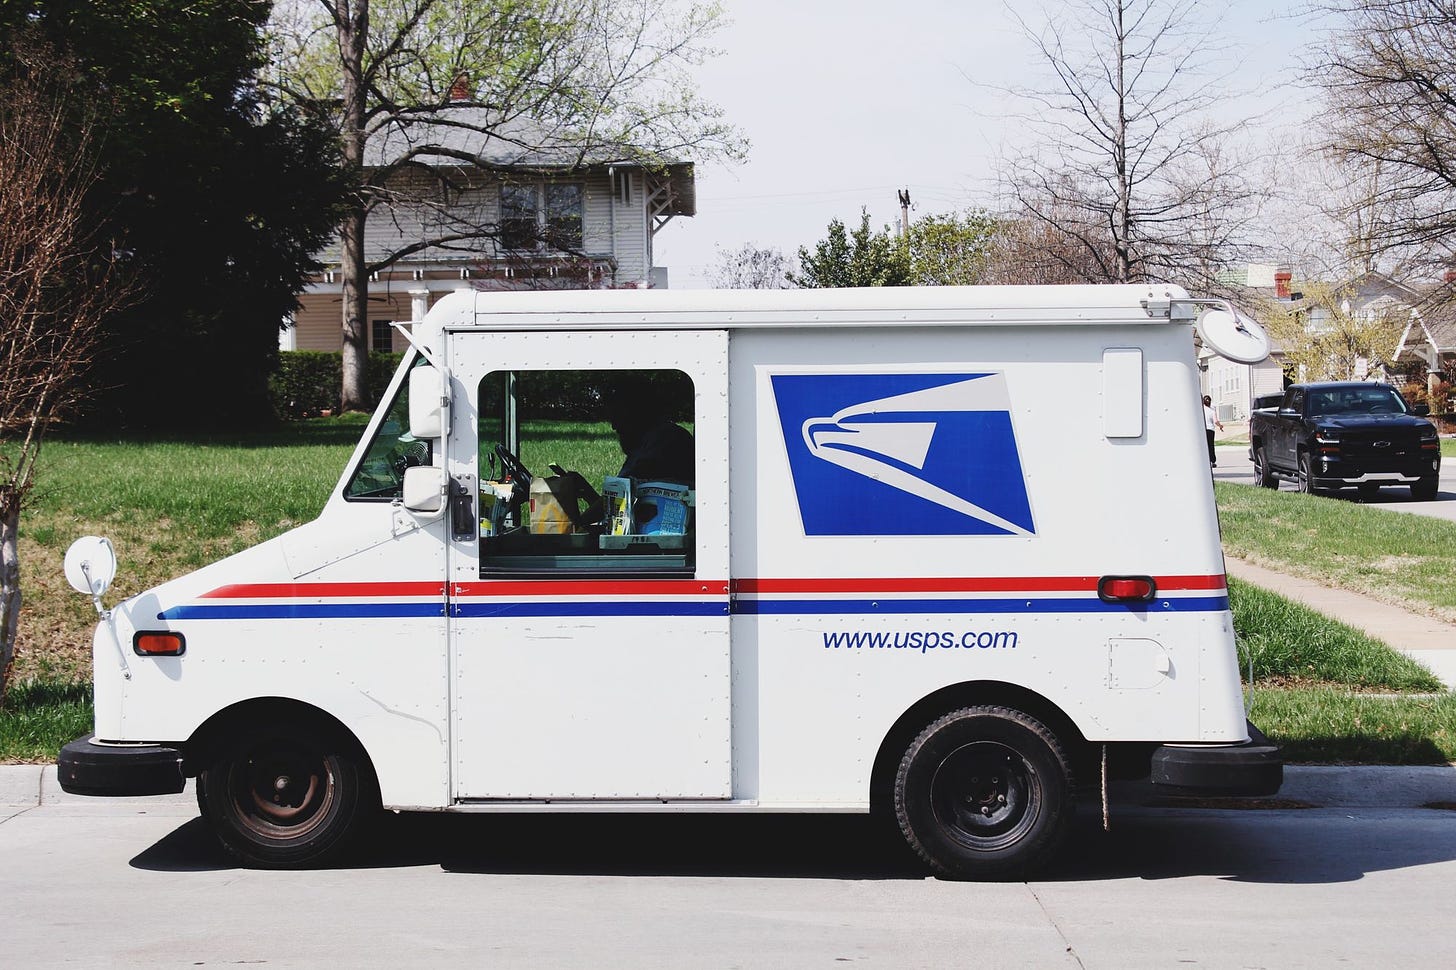 Let's talk about your mail carrier